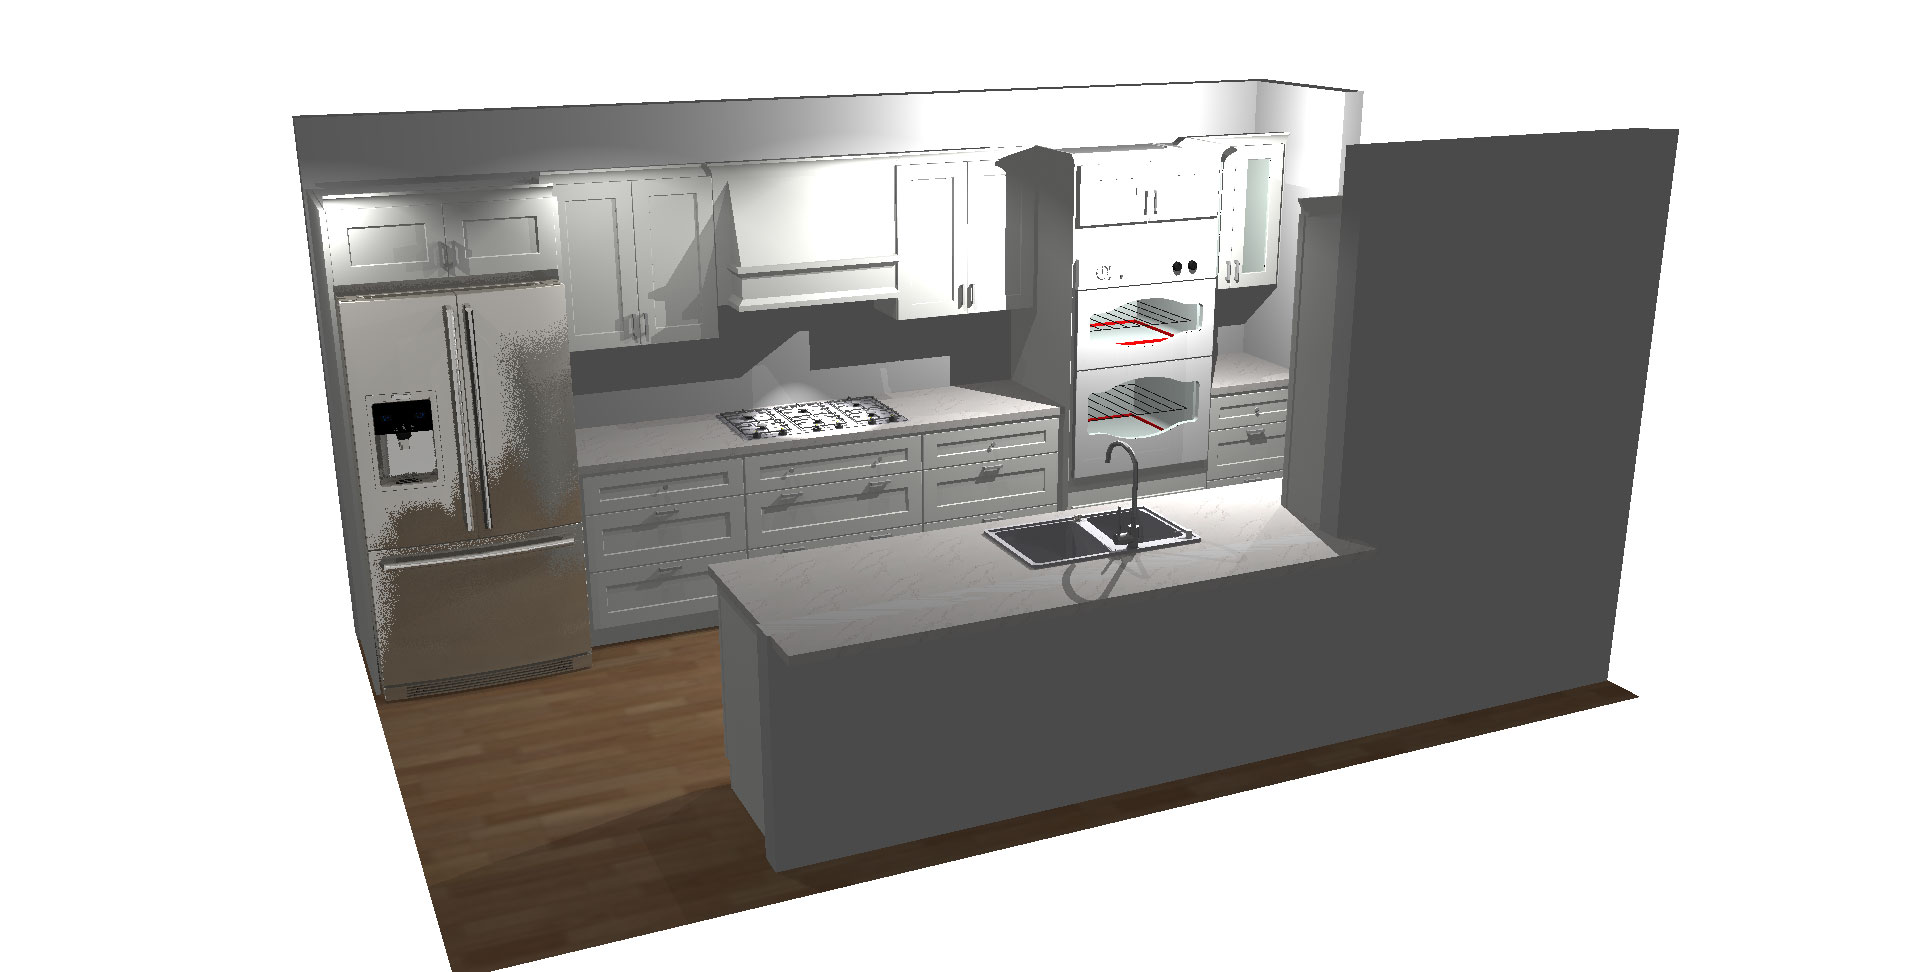 3D render showcasing an innovative kitchen layout and luxurious finishes